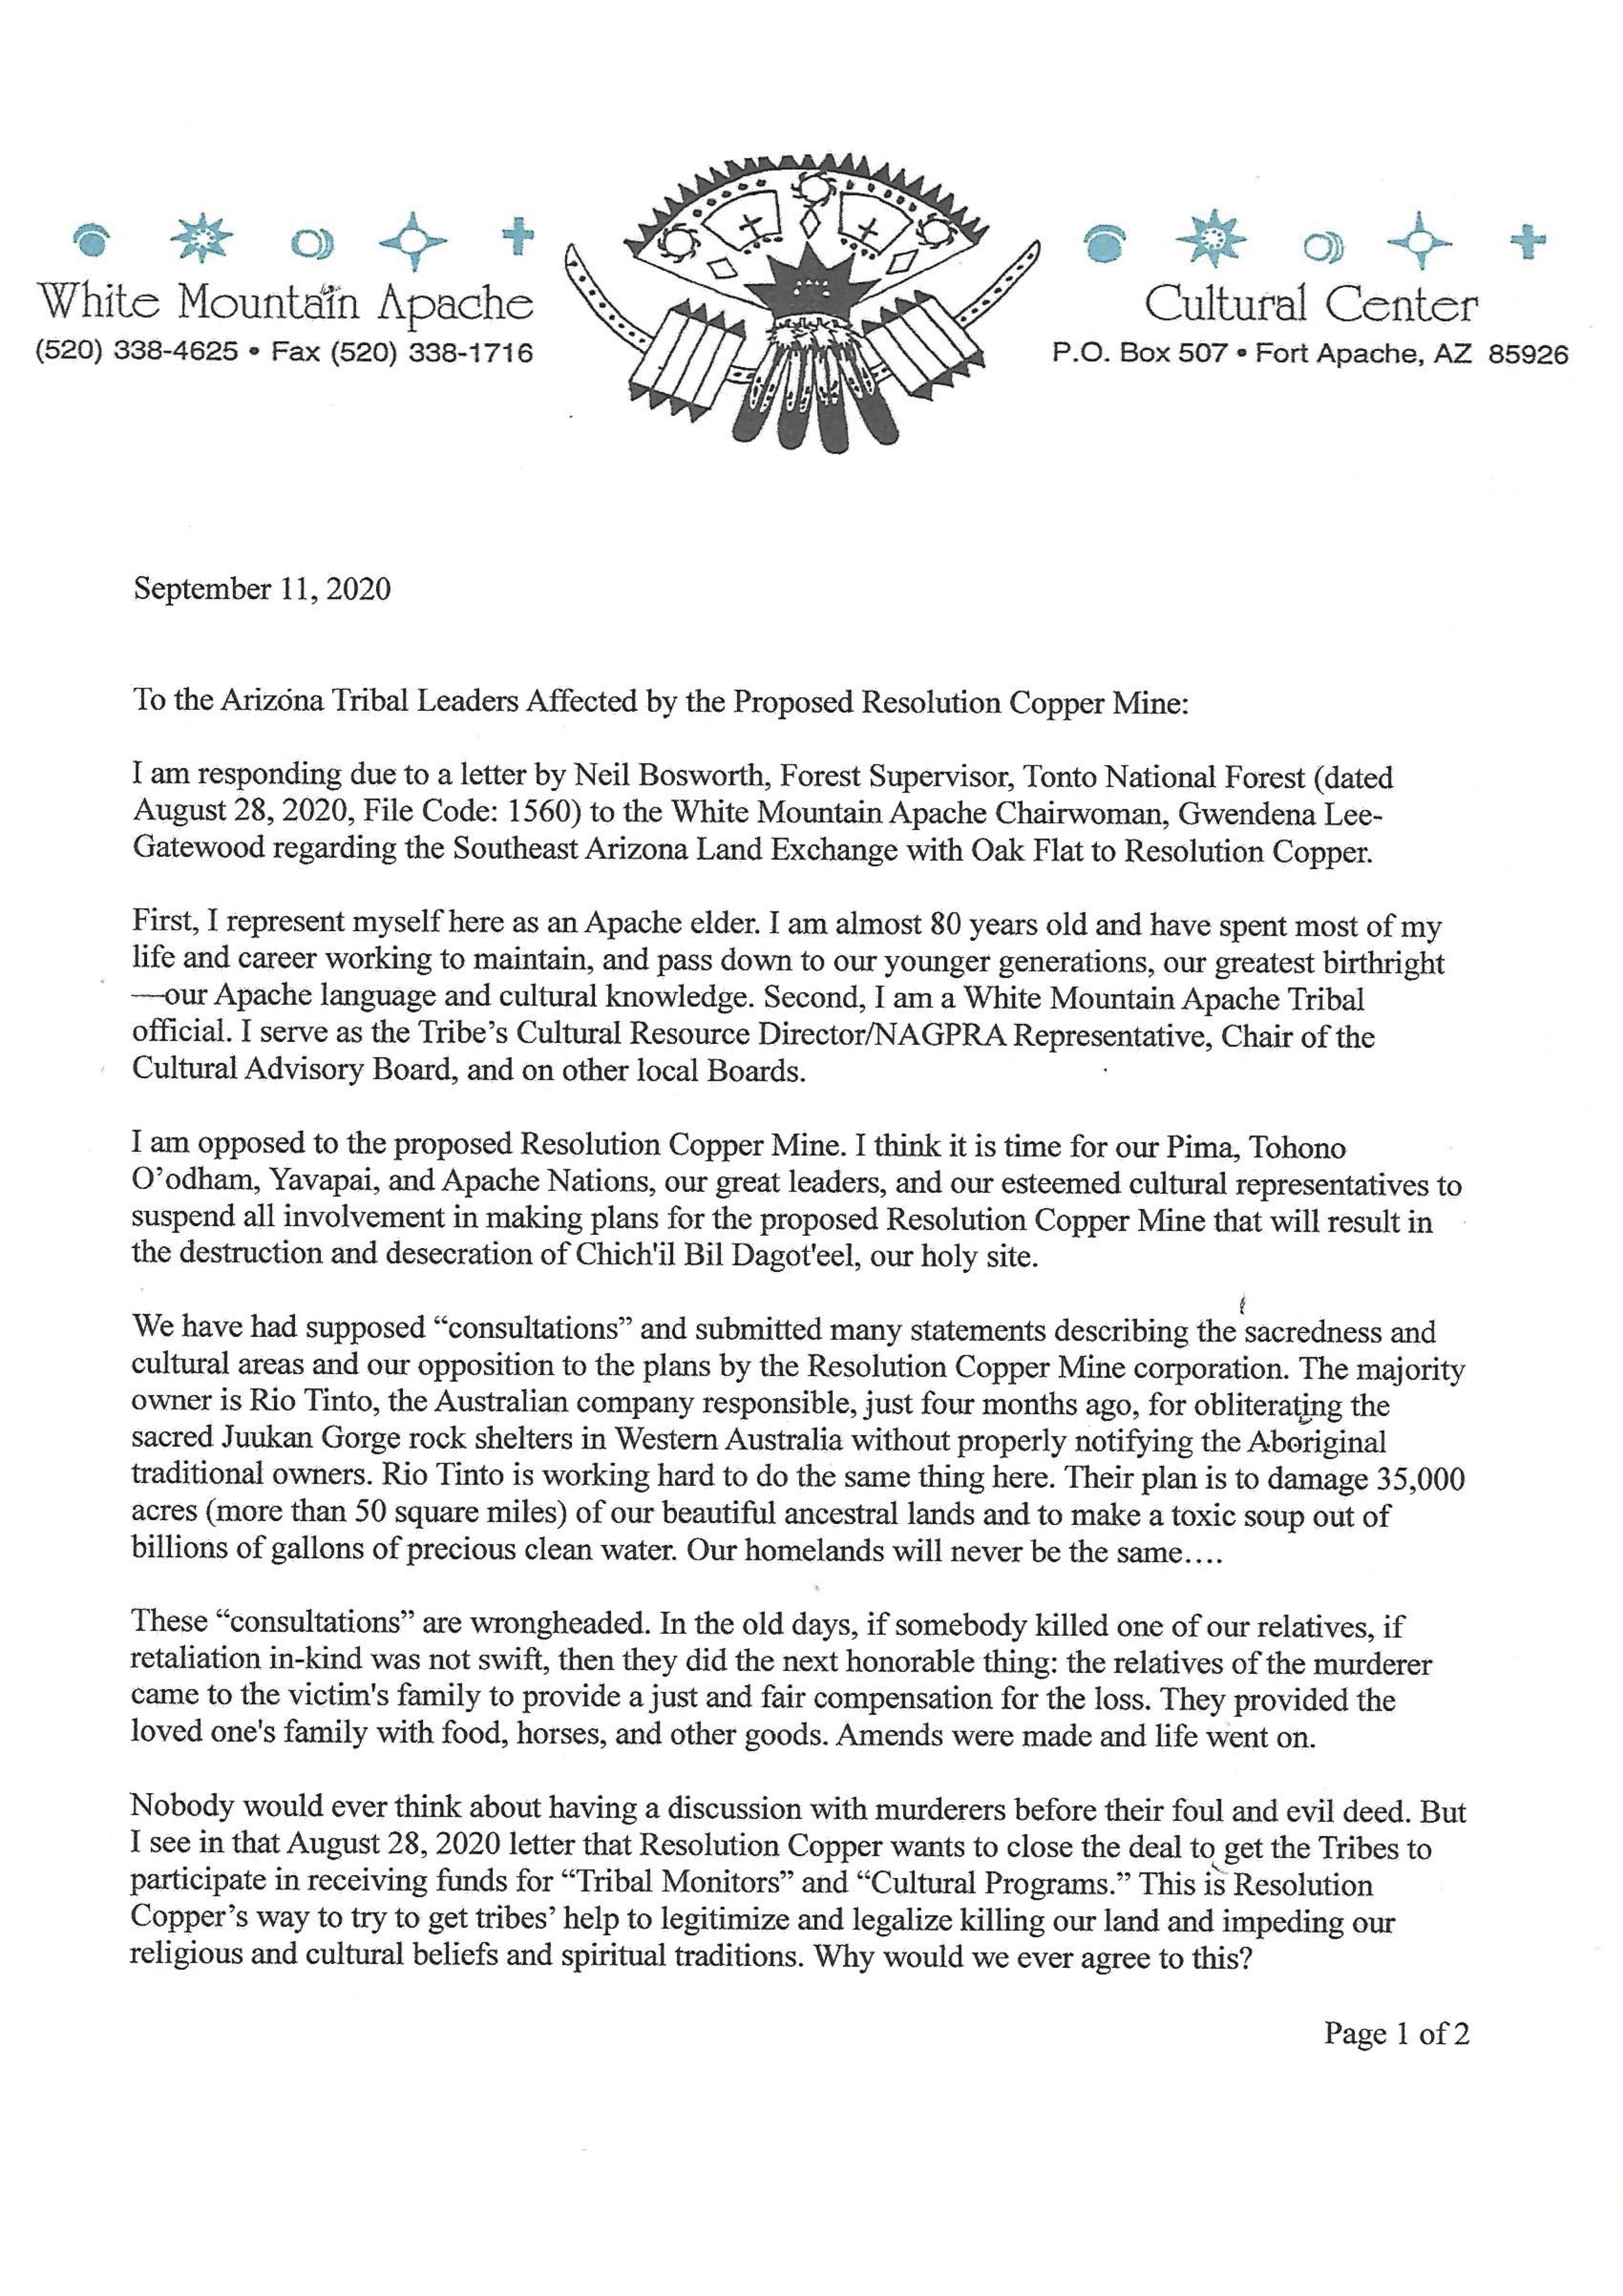 A 20200912 correspondence RAMON RILEY to ARIZONA TRIBAL LEADERS re JUST SAY NO TO RESOLUTION COPPER MINE